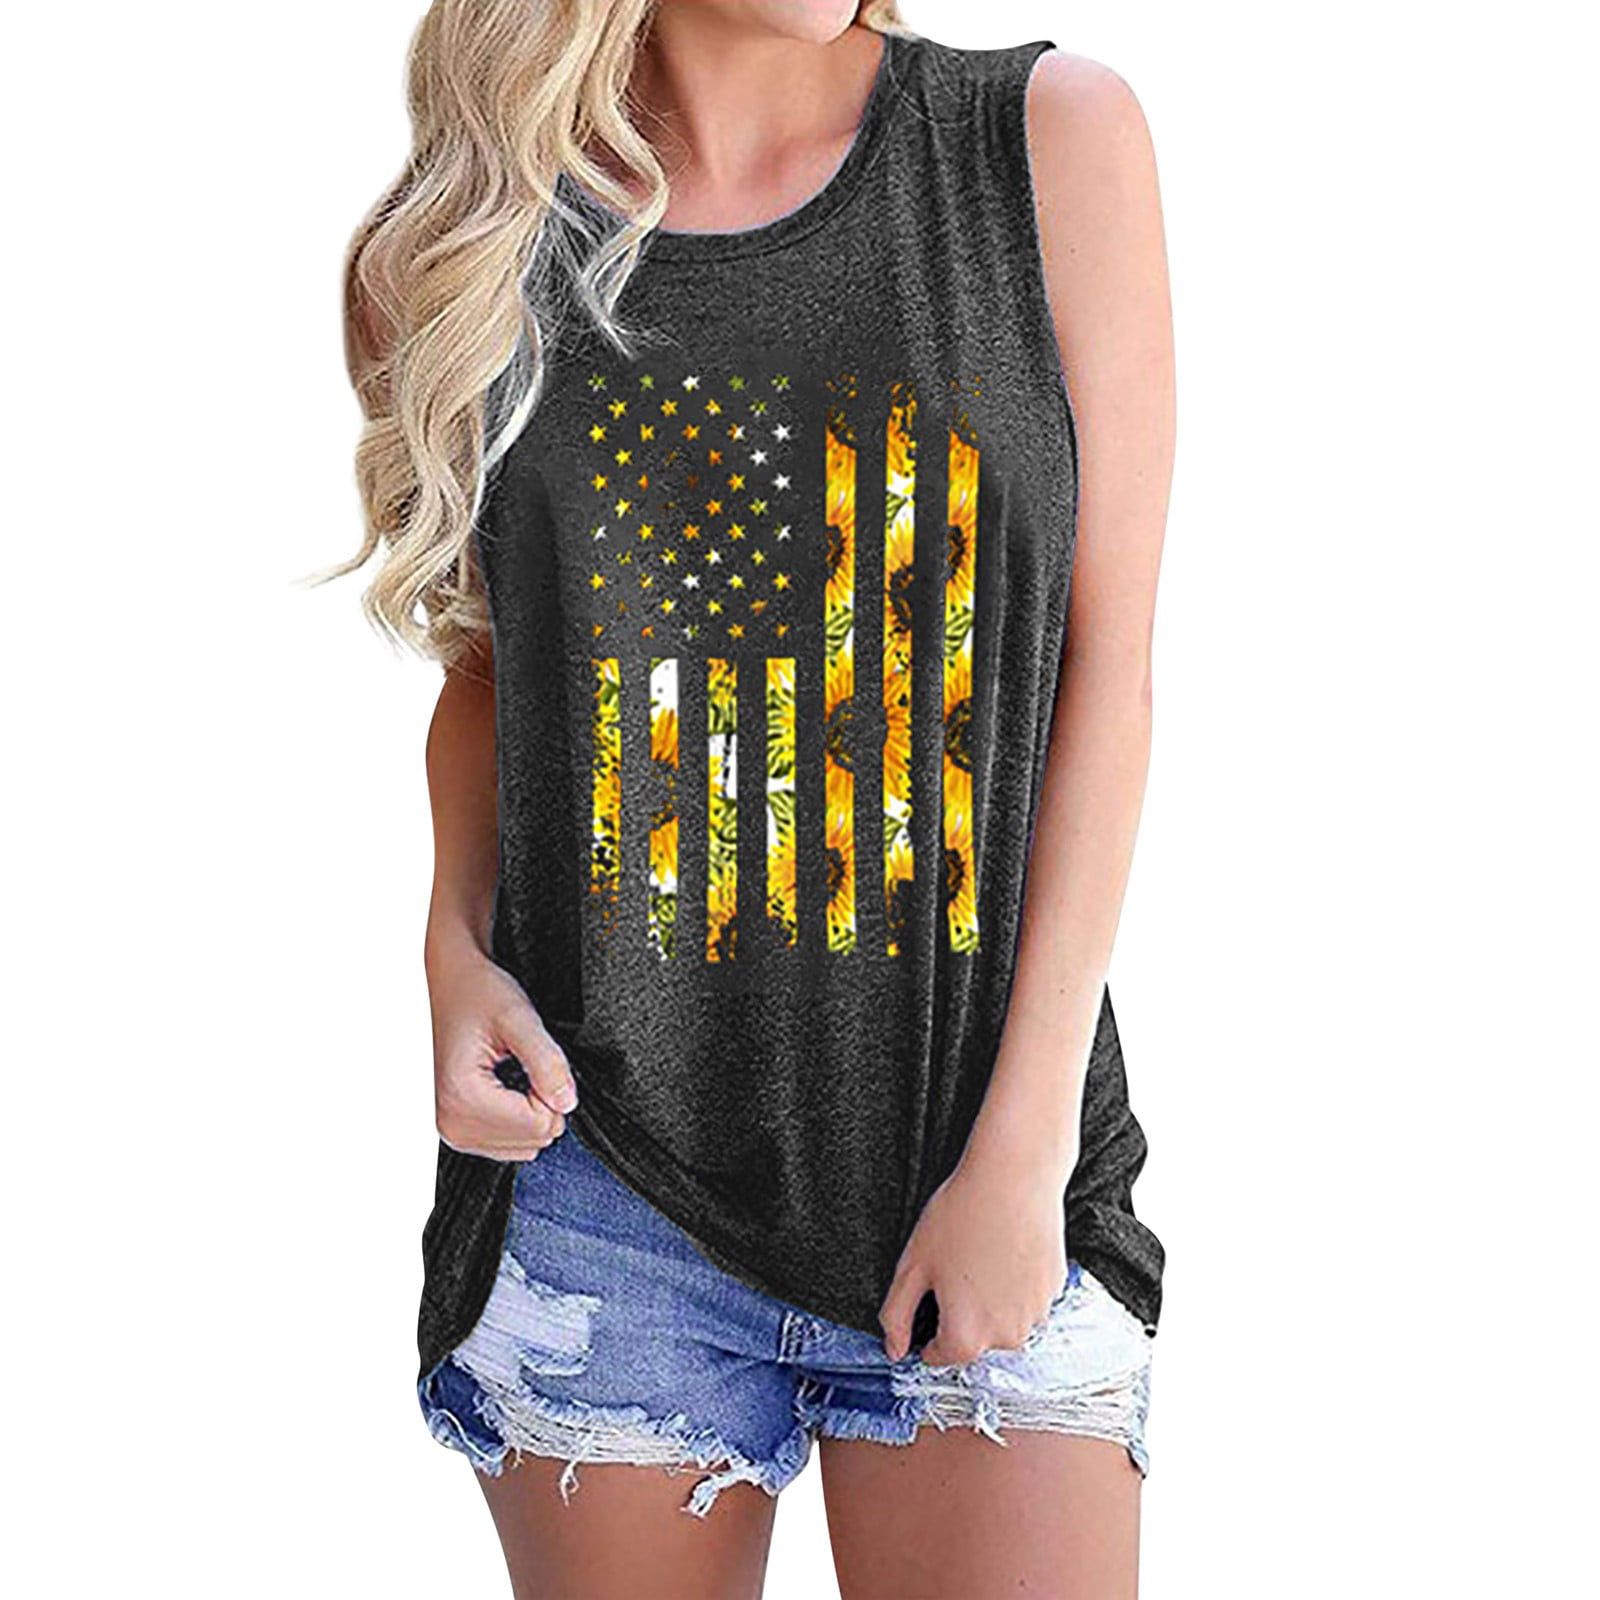 Sinful Spring Air Fashion Graphic Tank Top for Women 